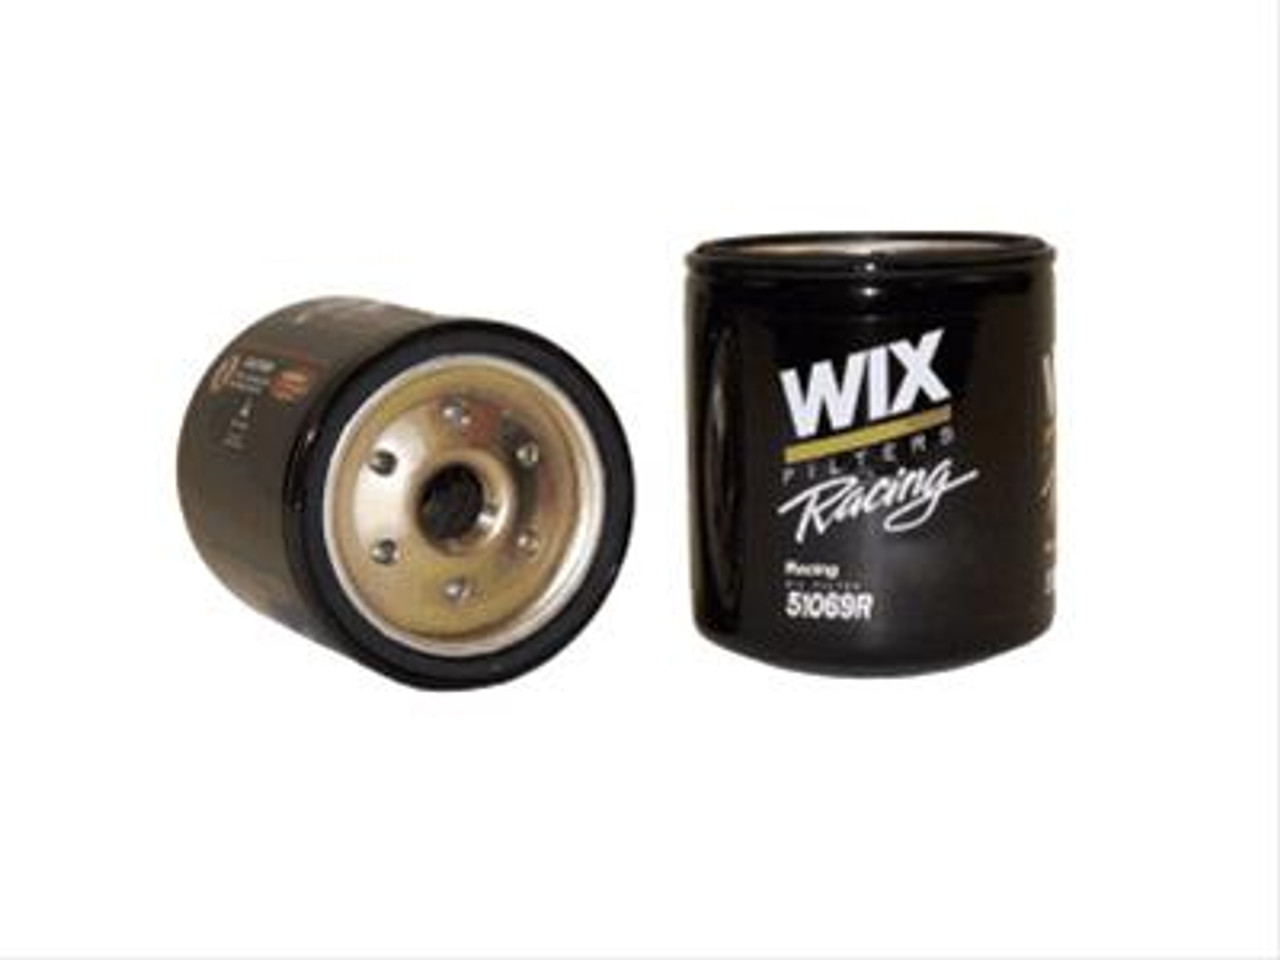 WIX Filters Racing Oil Filter - 51069R - Chevy Short